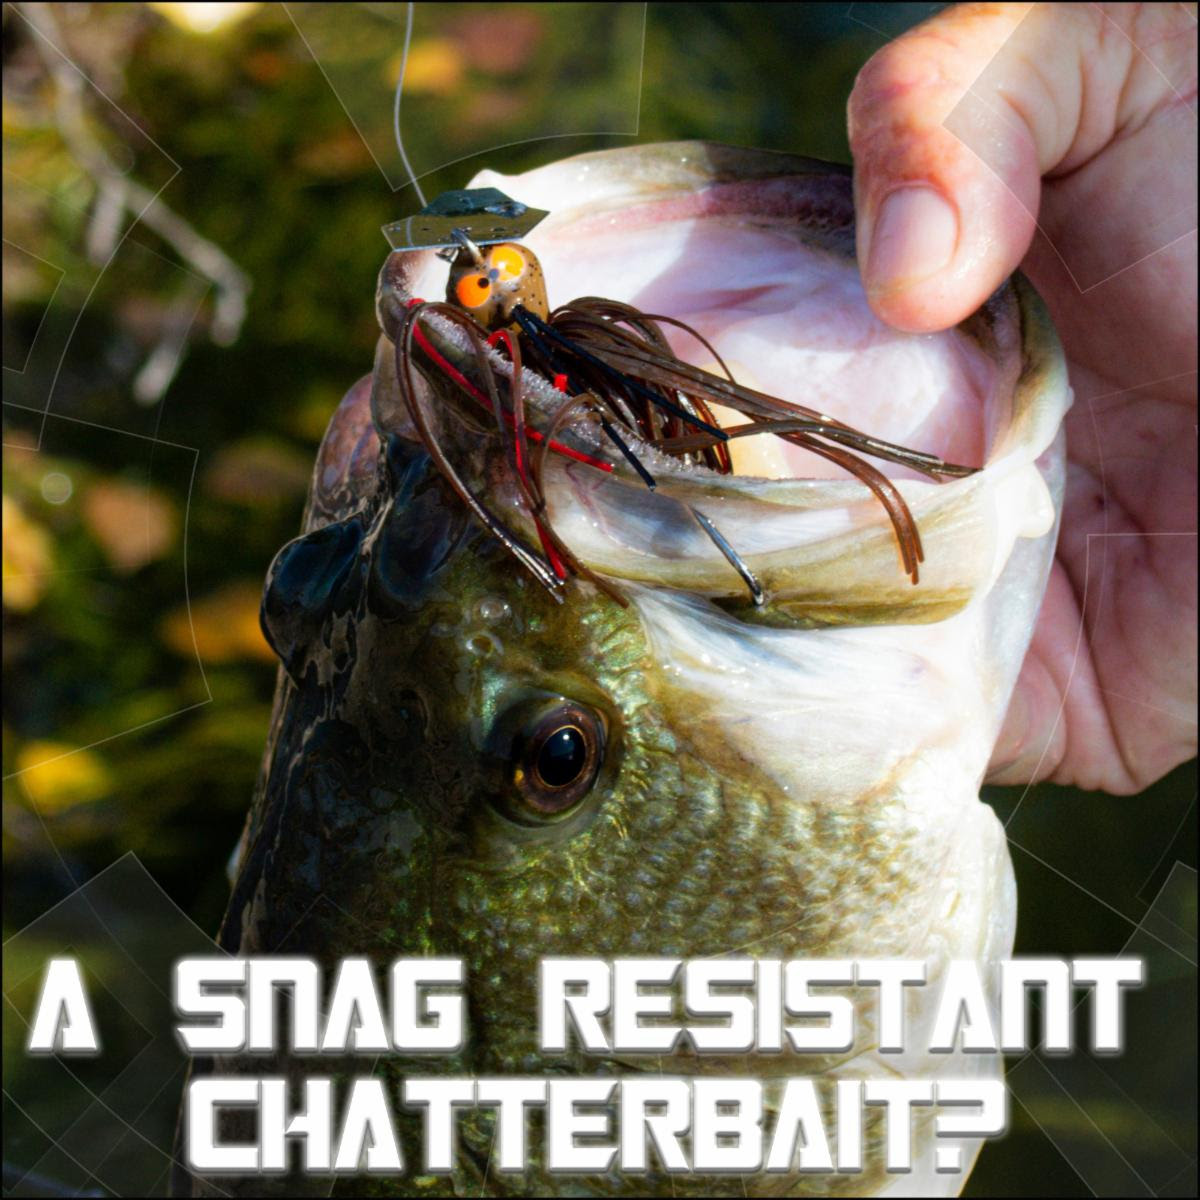 A SNAG RESISTANT ChatterBait?